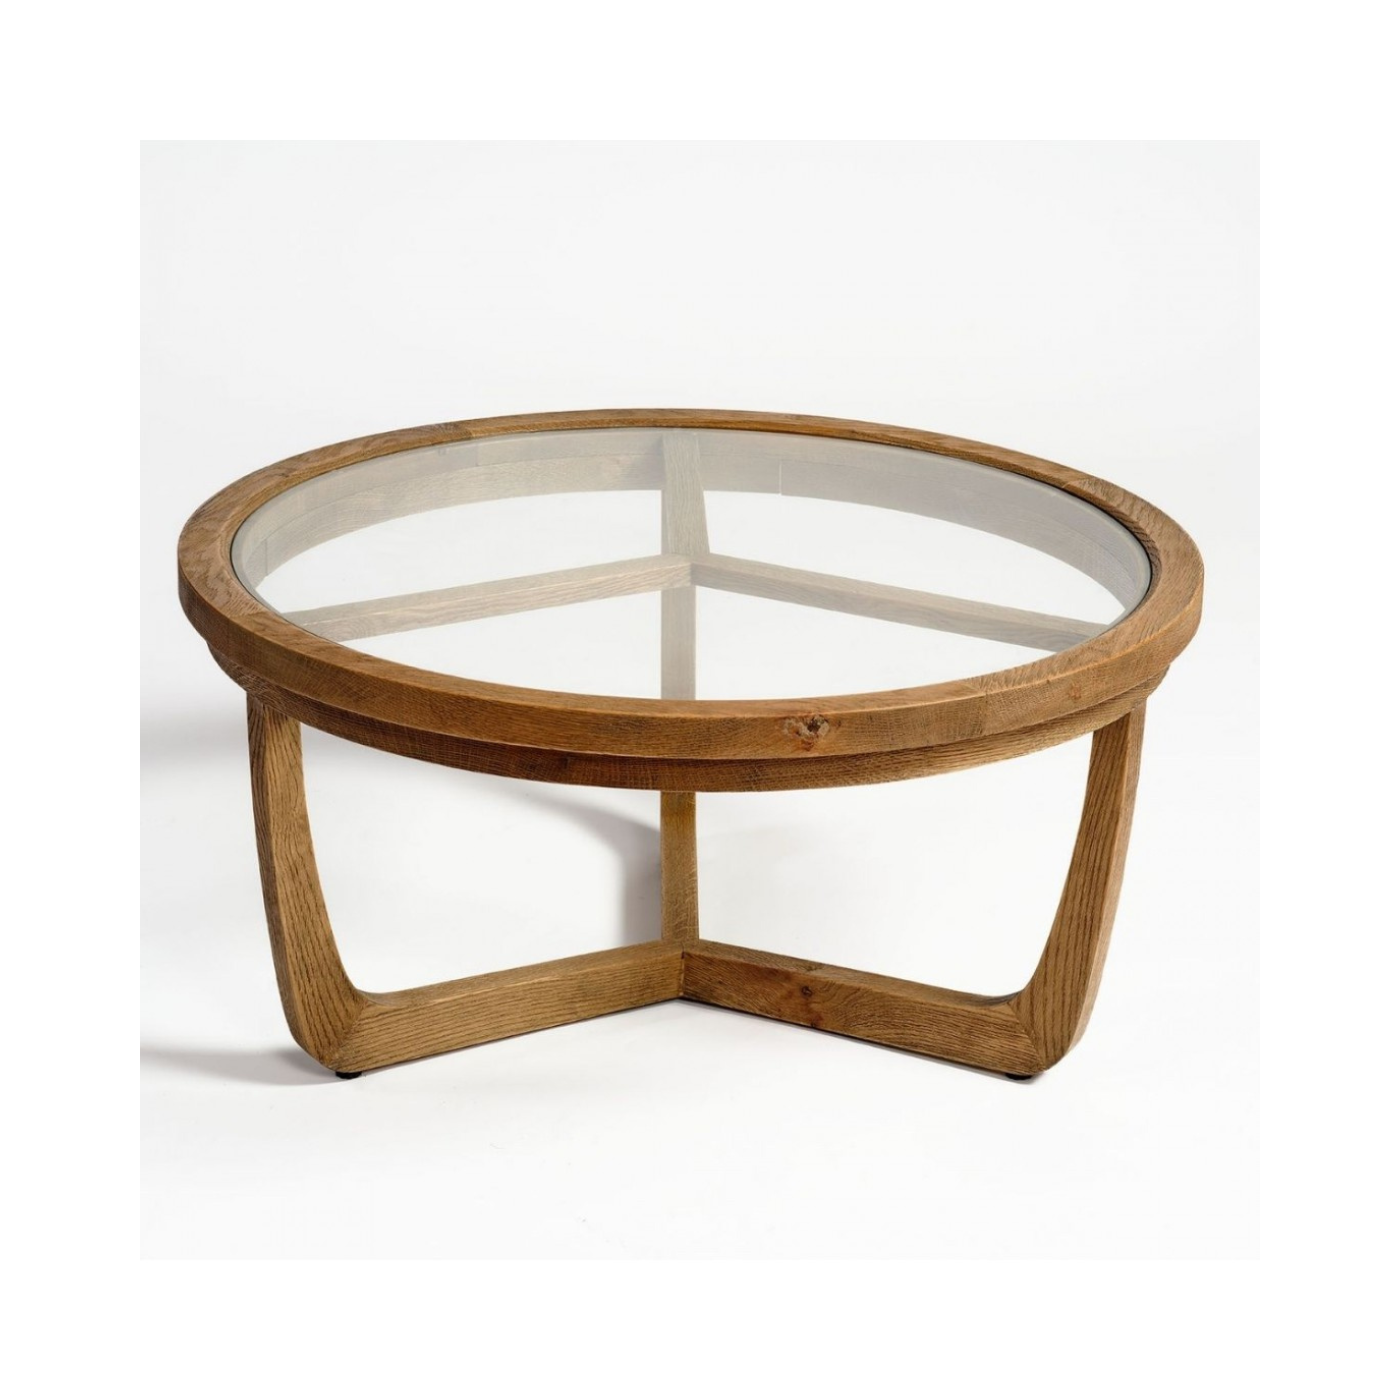 Ariana Natural Oak Wood Round Coffee Table with Glass Top